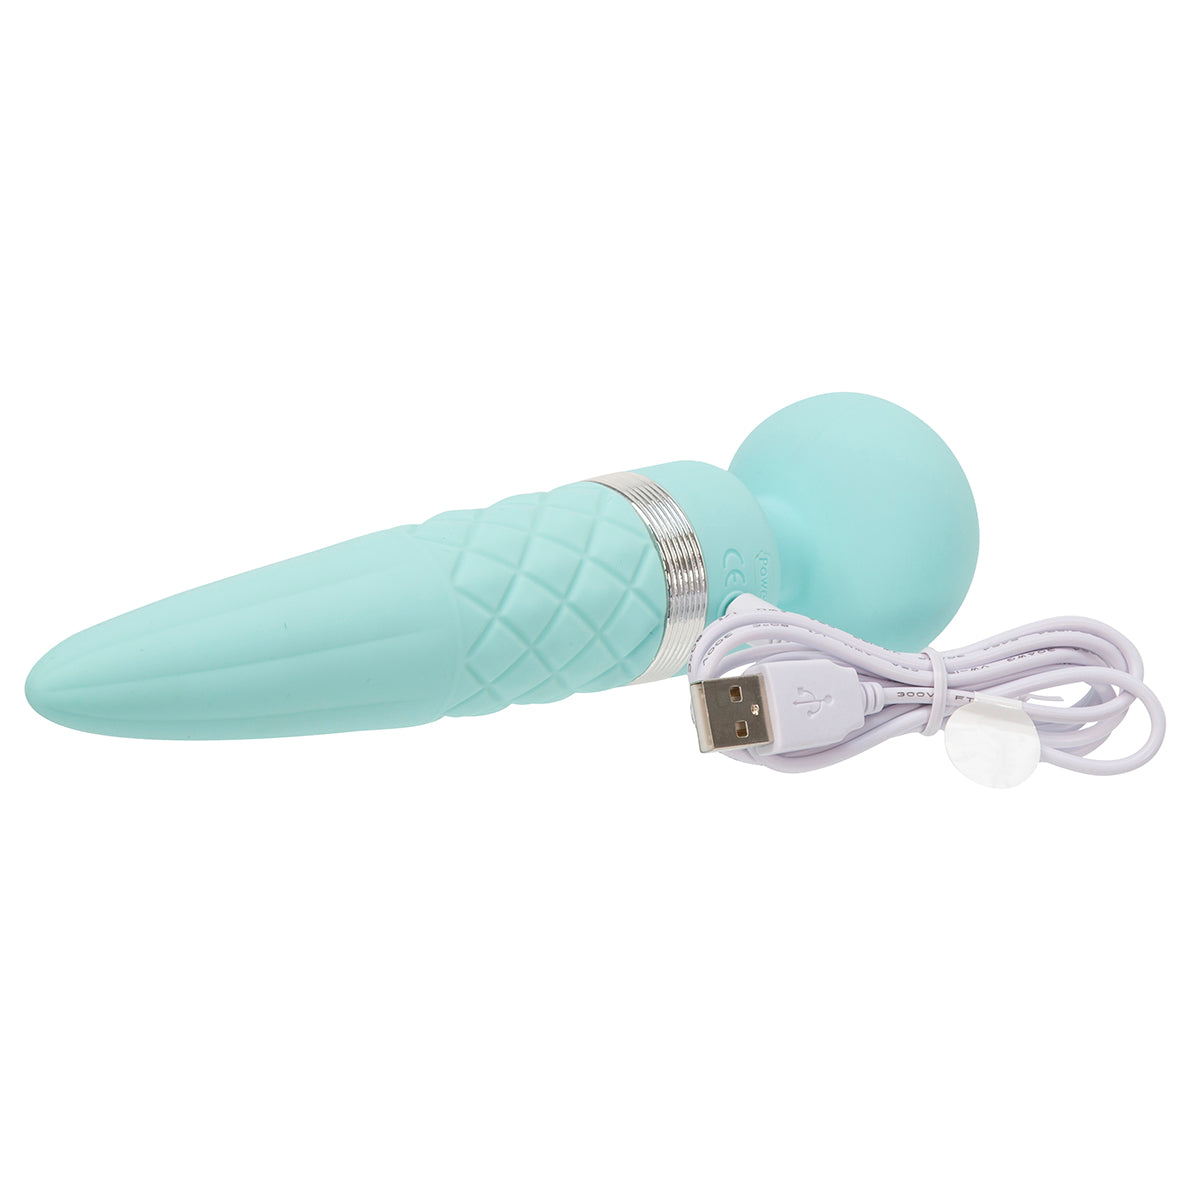 Pillow Talk Sultry Wand - Assorted Colors